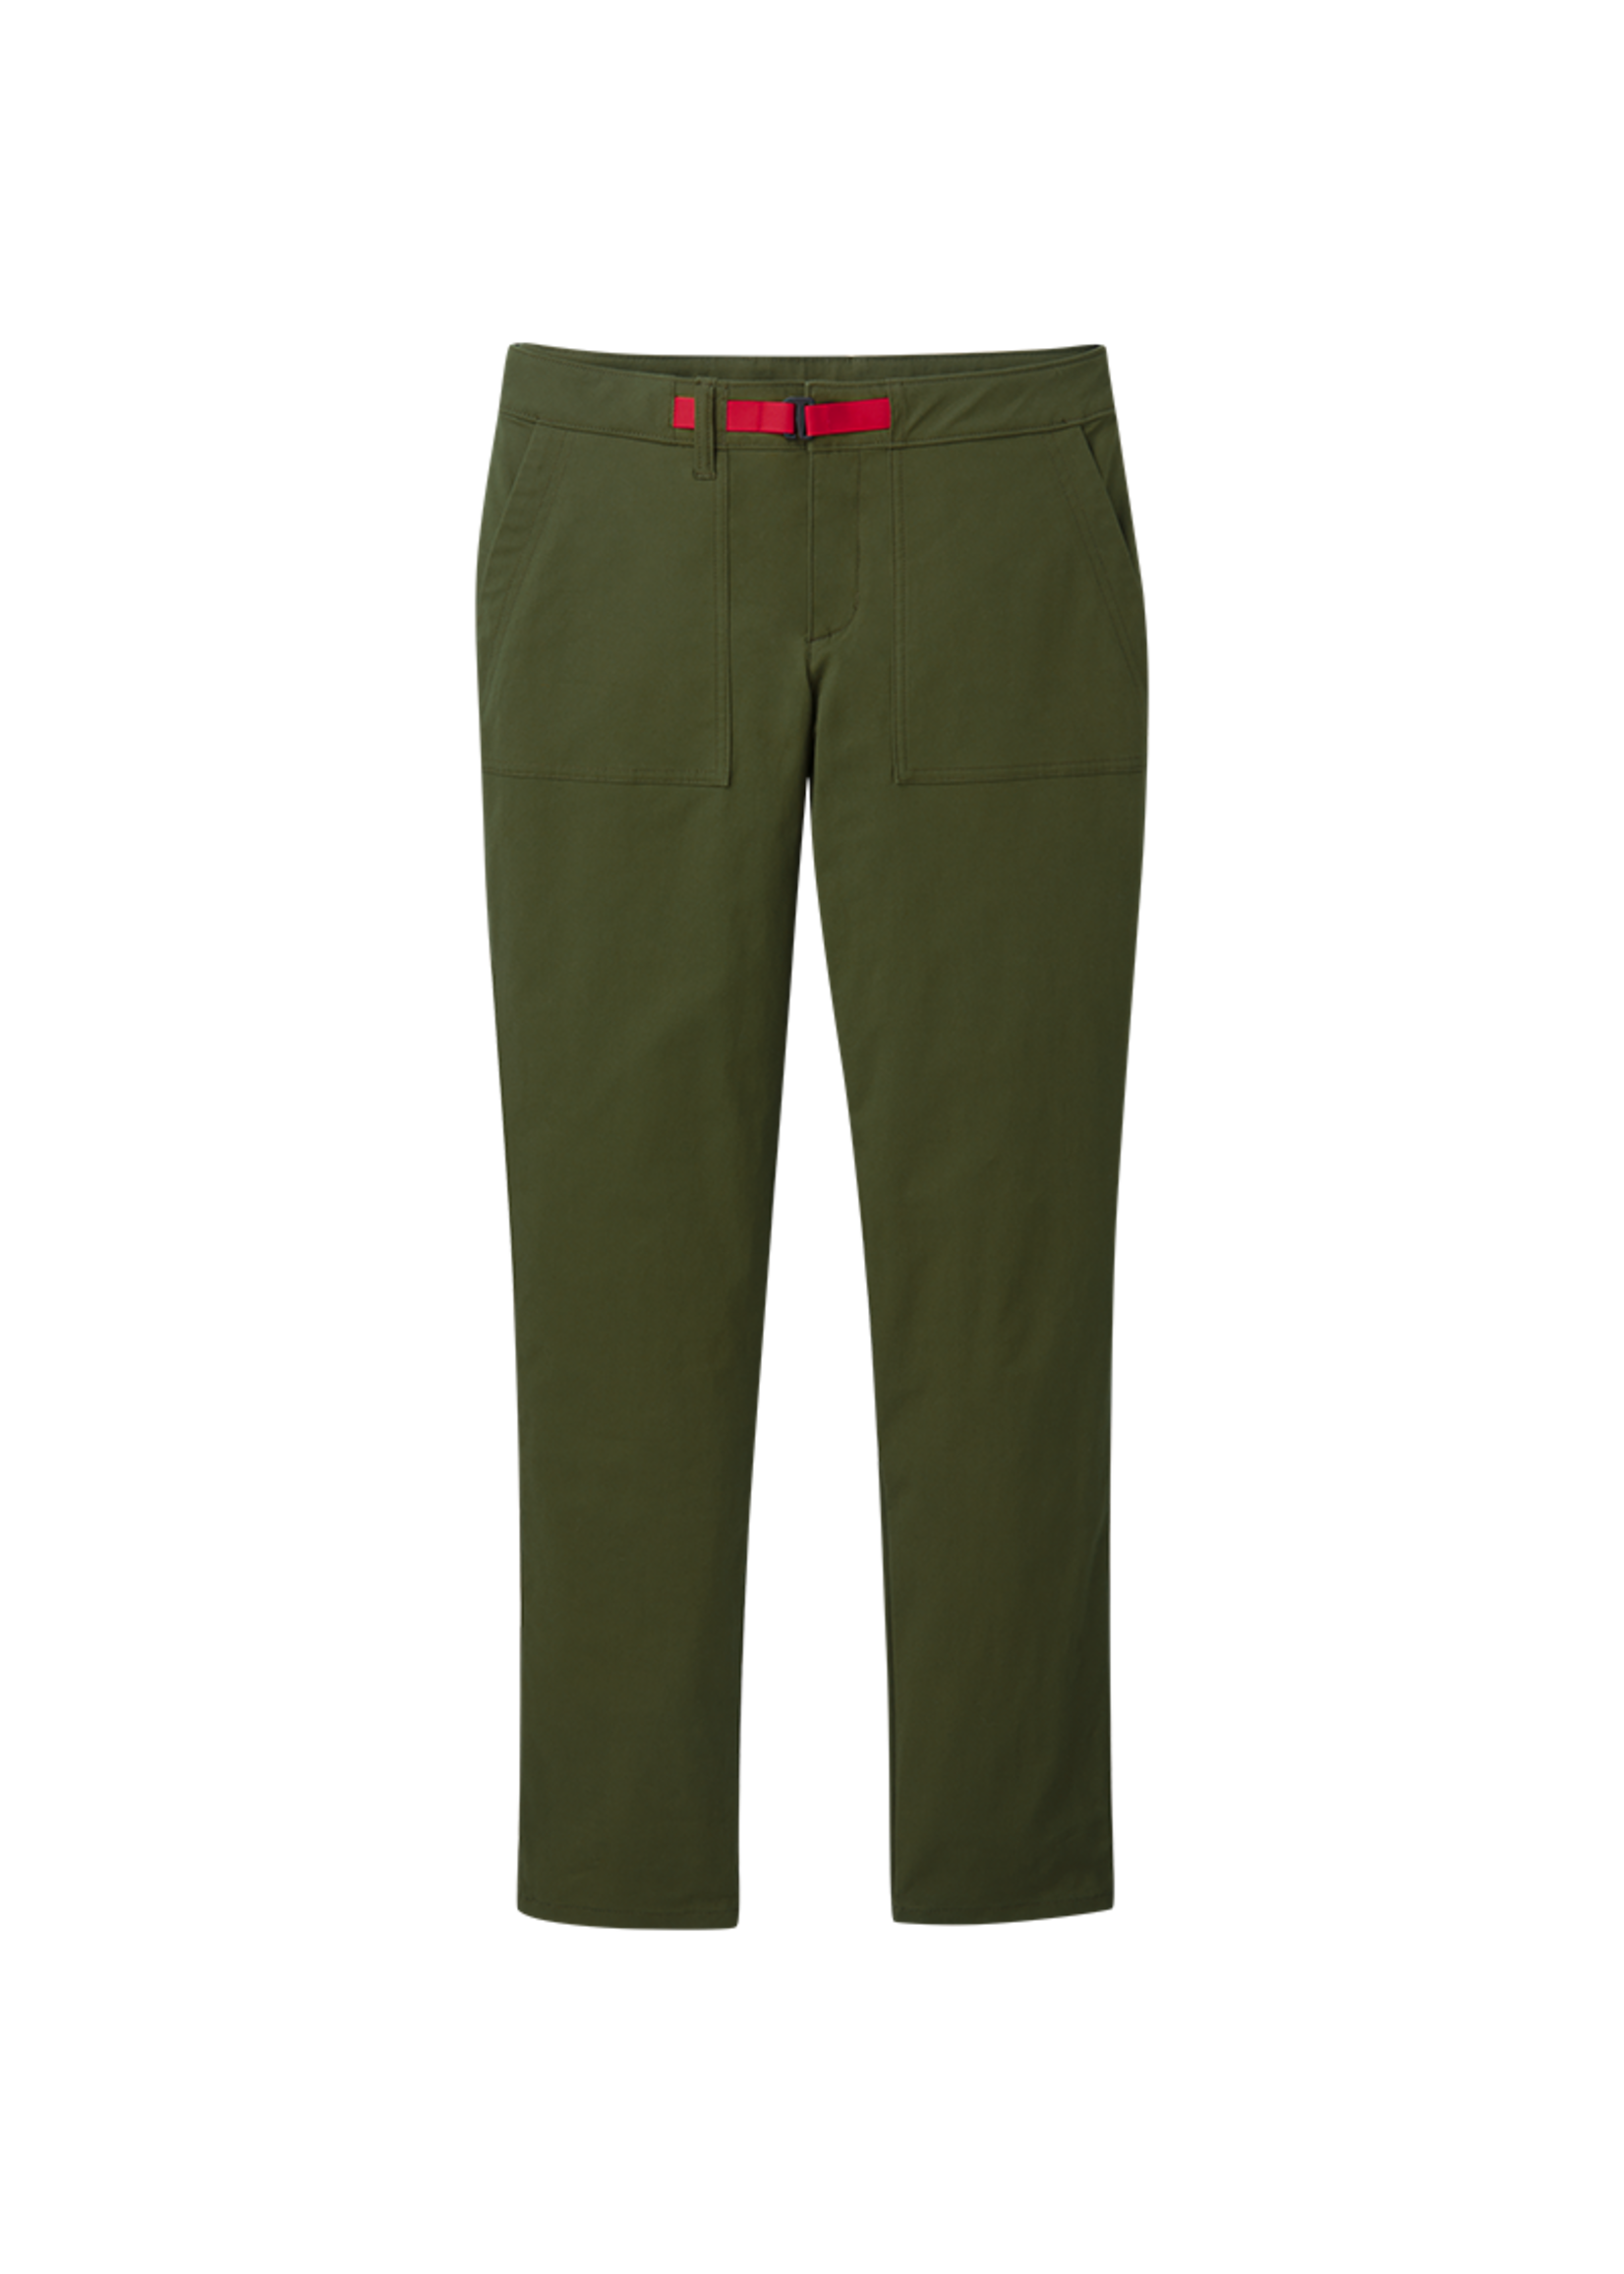 Outdoor Research Pantalon Outdoor Research Shastin - Femme